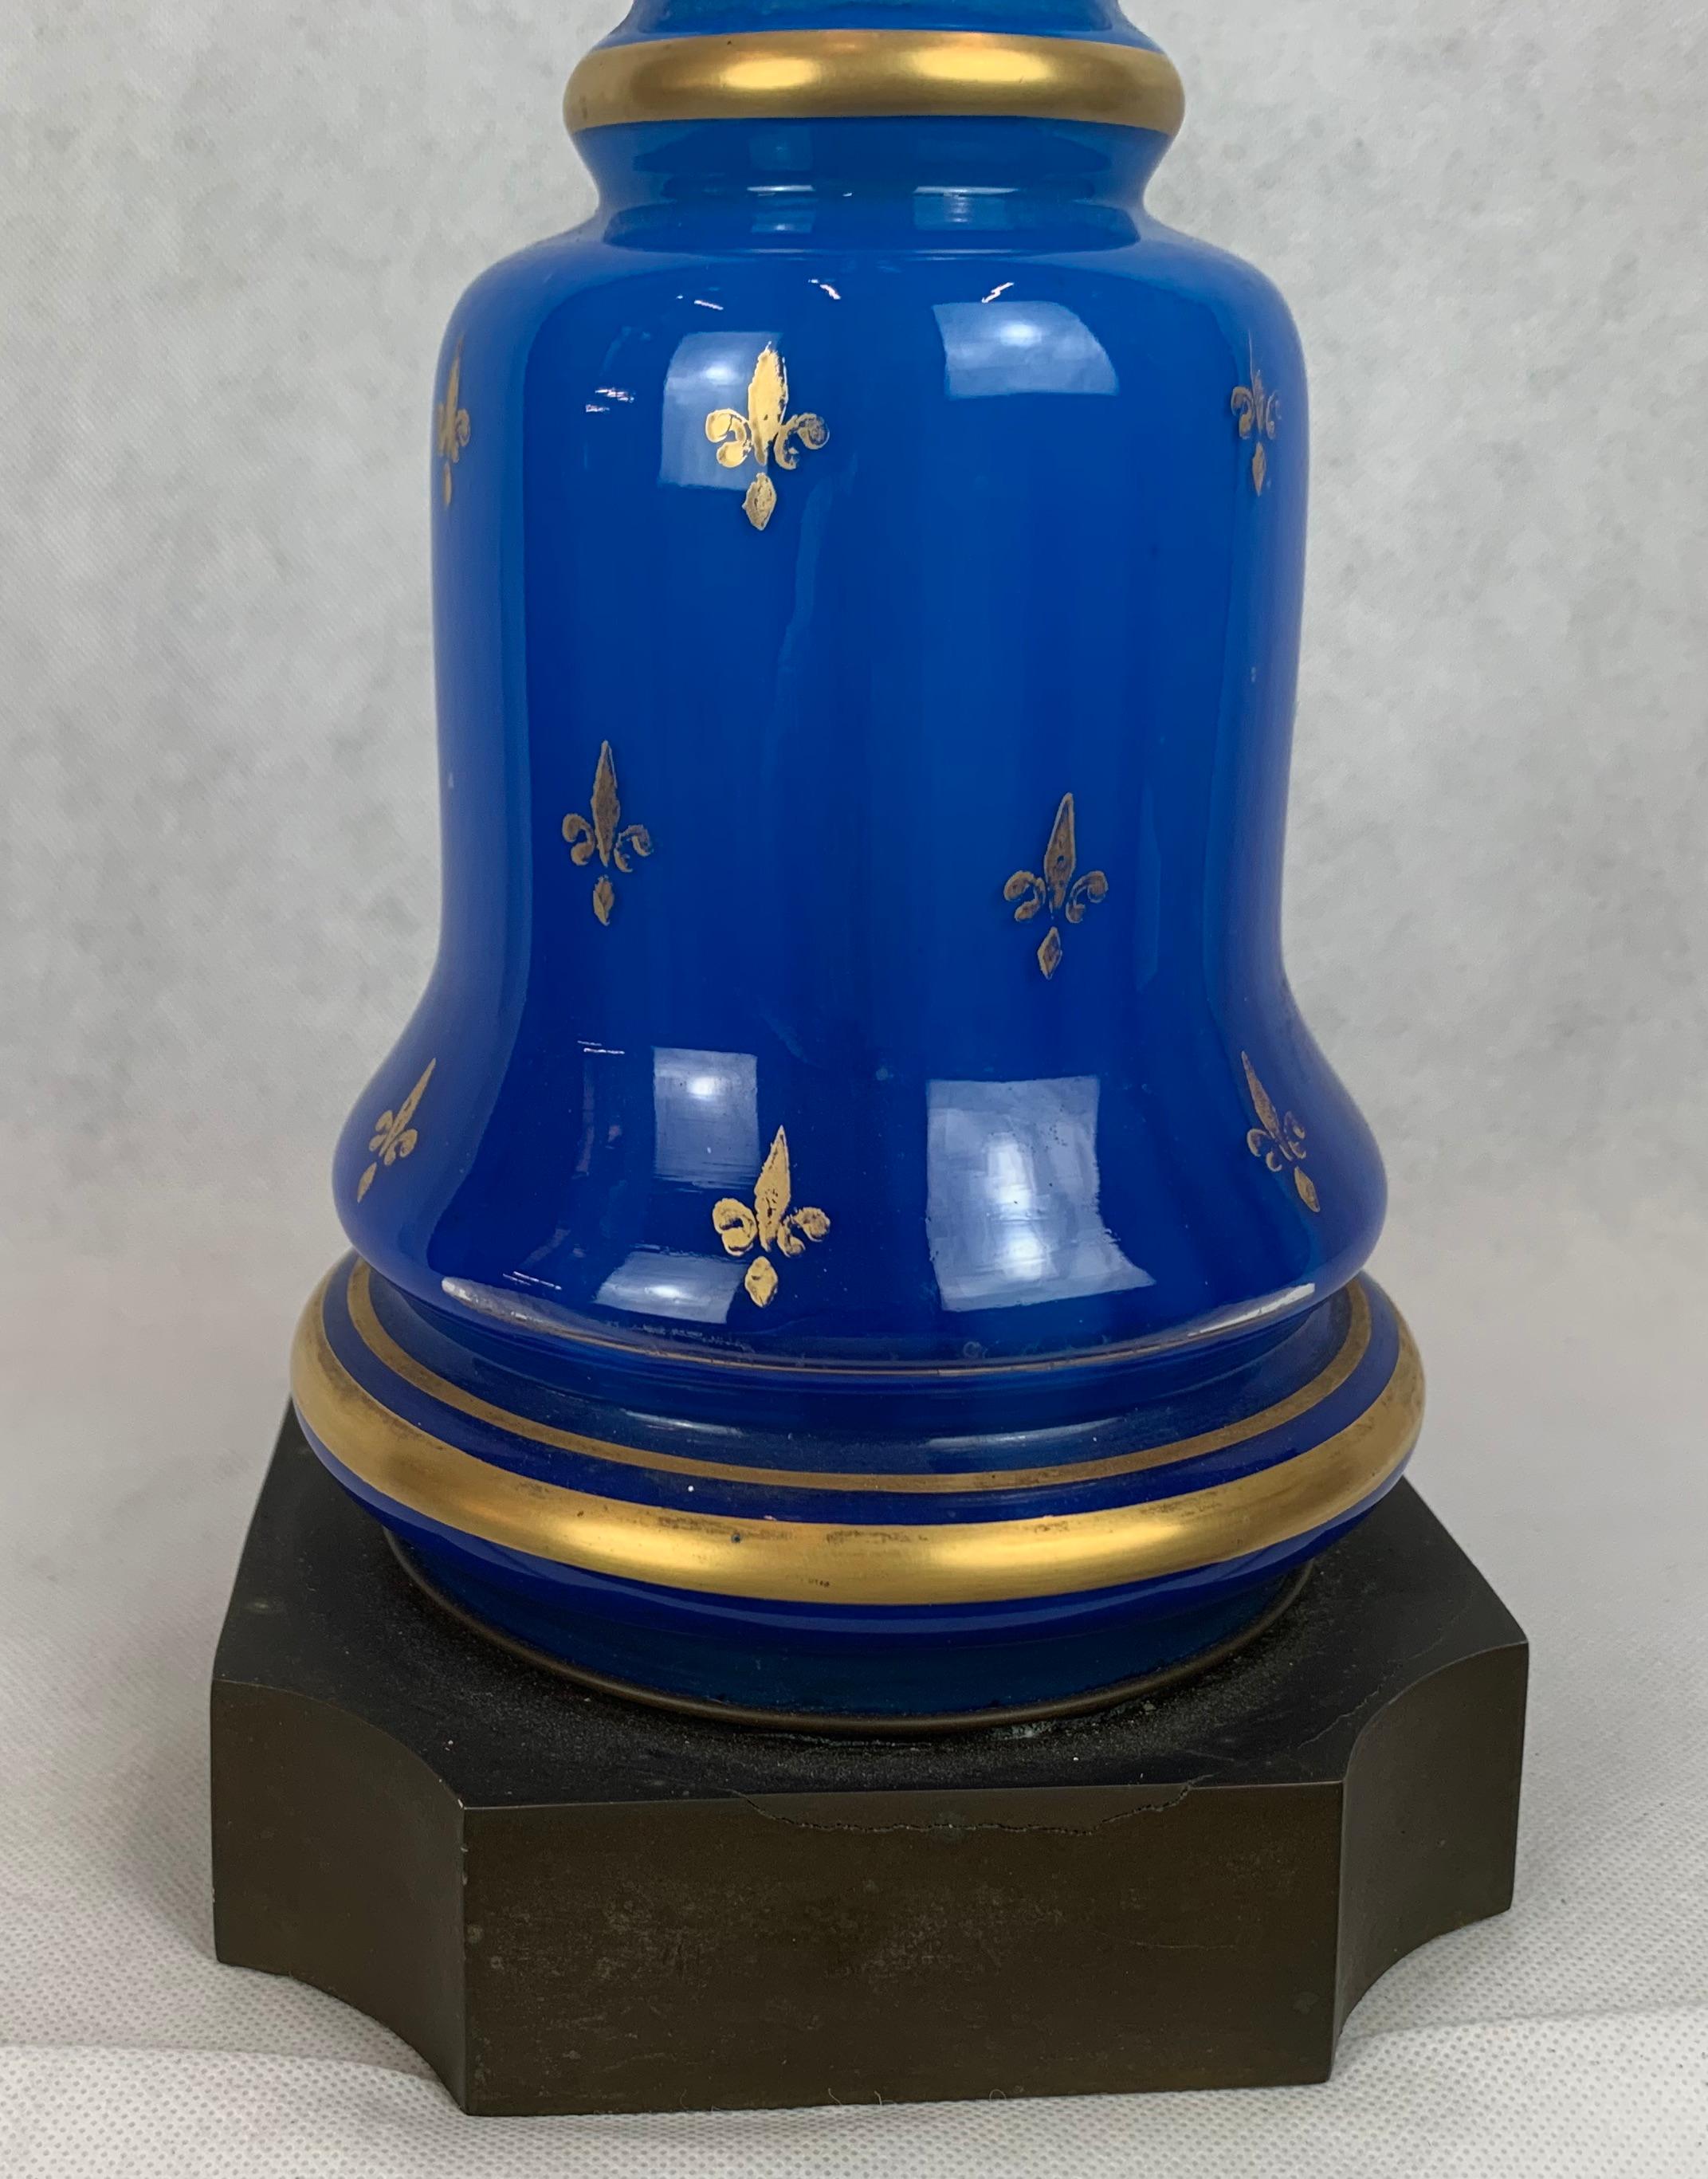 French Blue Opaline Glass Lamp with Gold Fleur-de-Lys Motif In Good Condition For Sale In West Palm Beach, FL